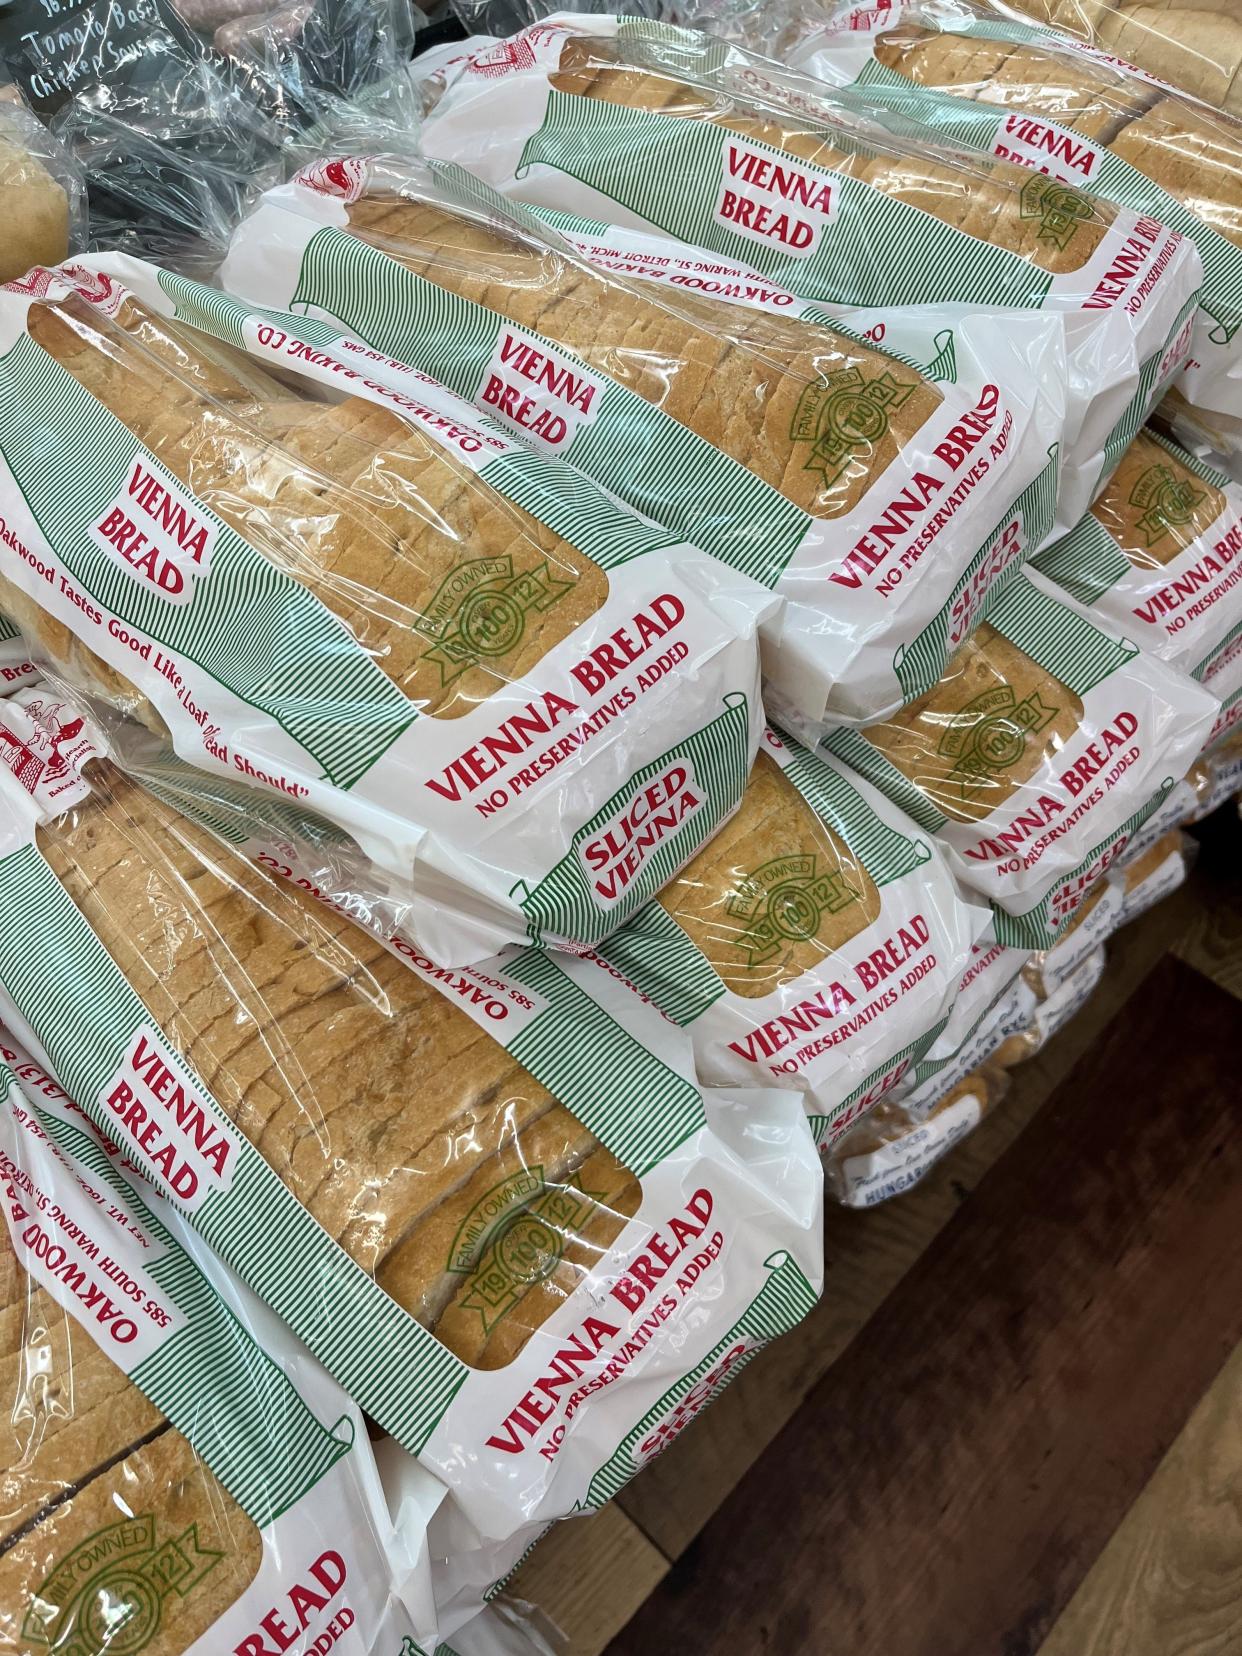 Oakwood Bakery Bread is back delivering to retail stores.